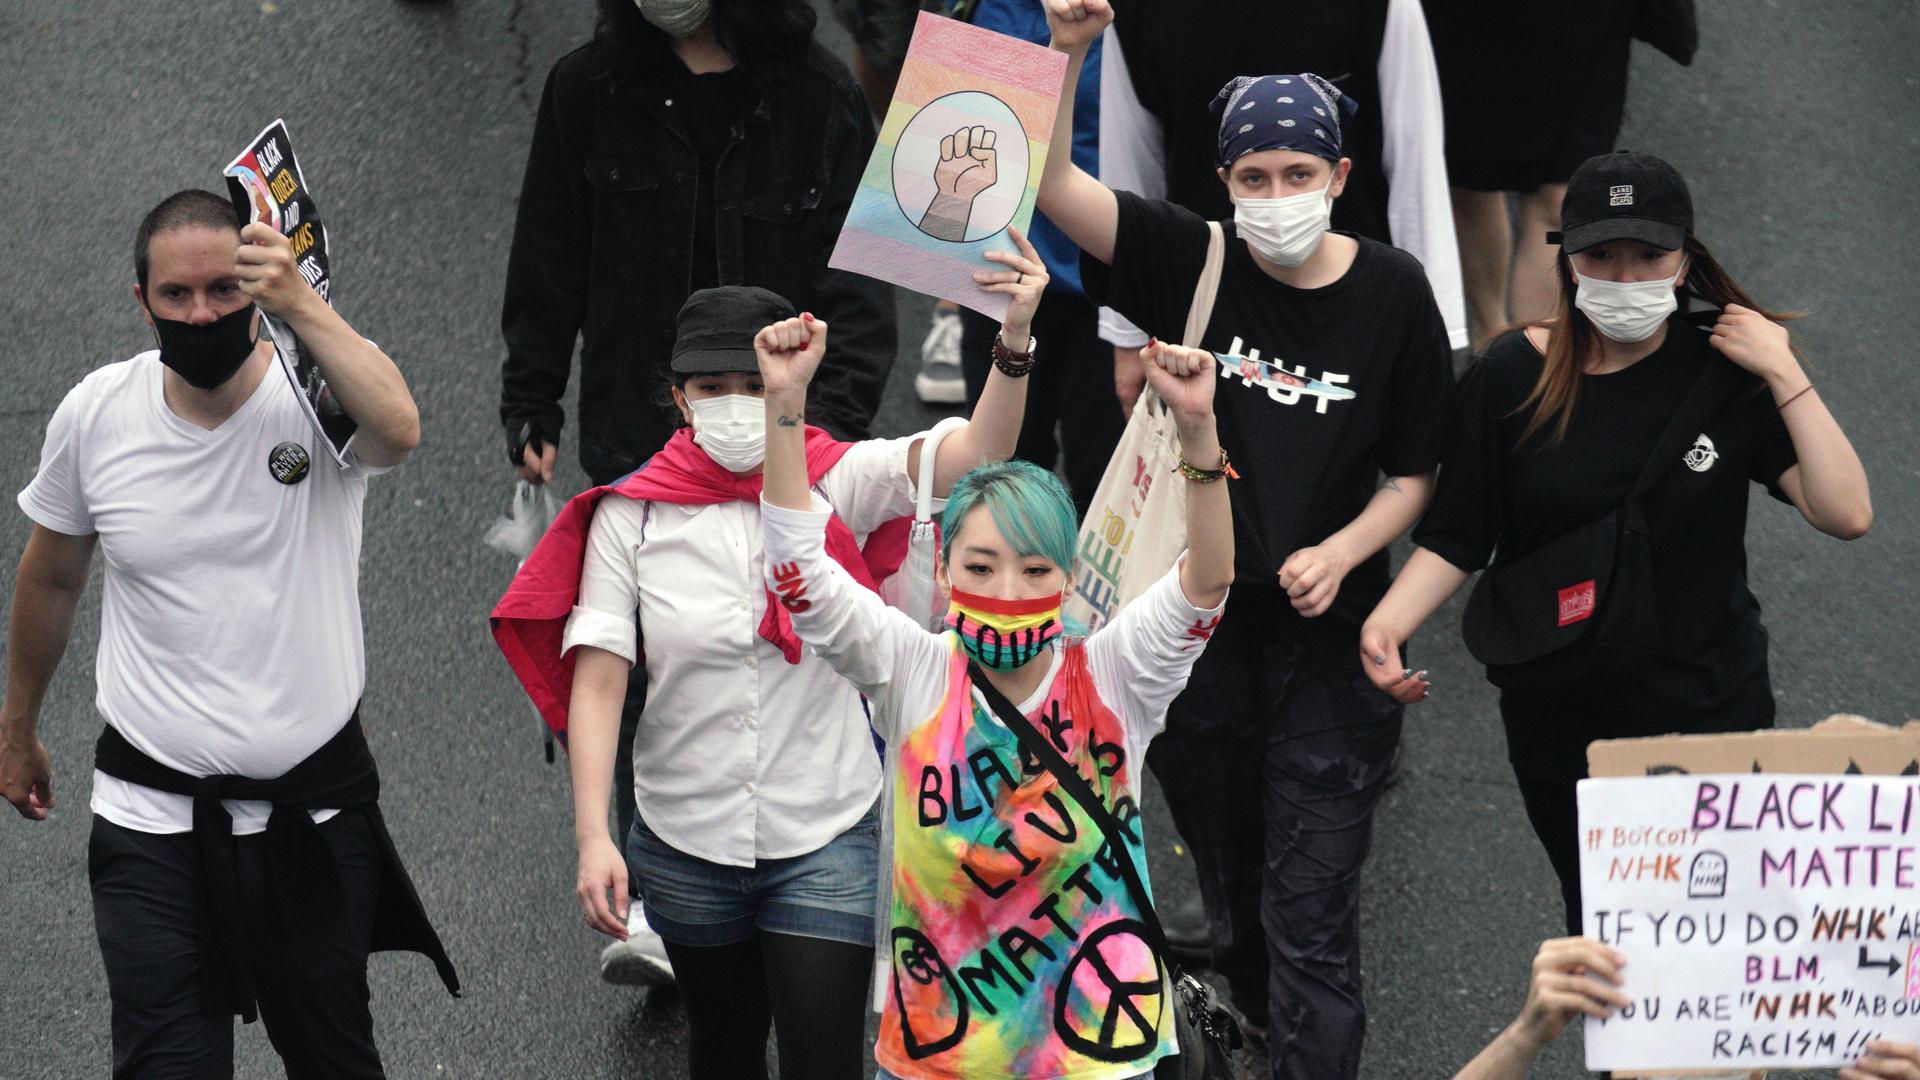 A group of protesters carries protest signs. One wears a colorful tie-dye shirt and has blue hair. The others wear white and black shirts.